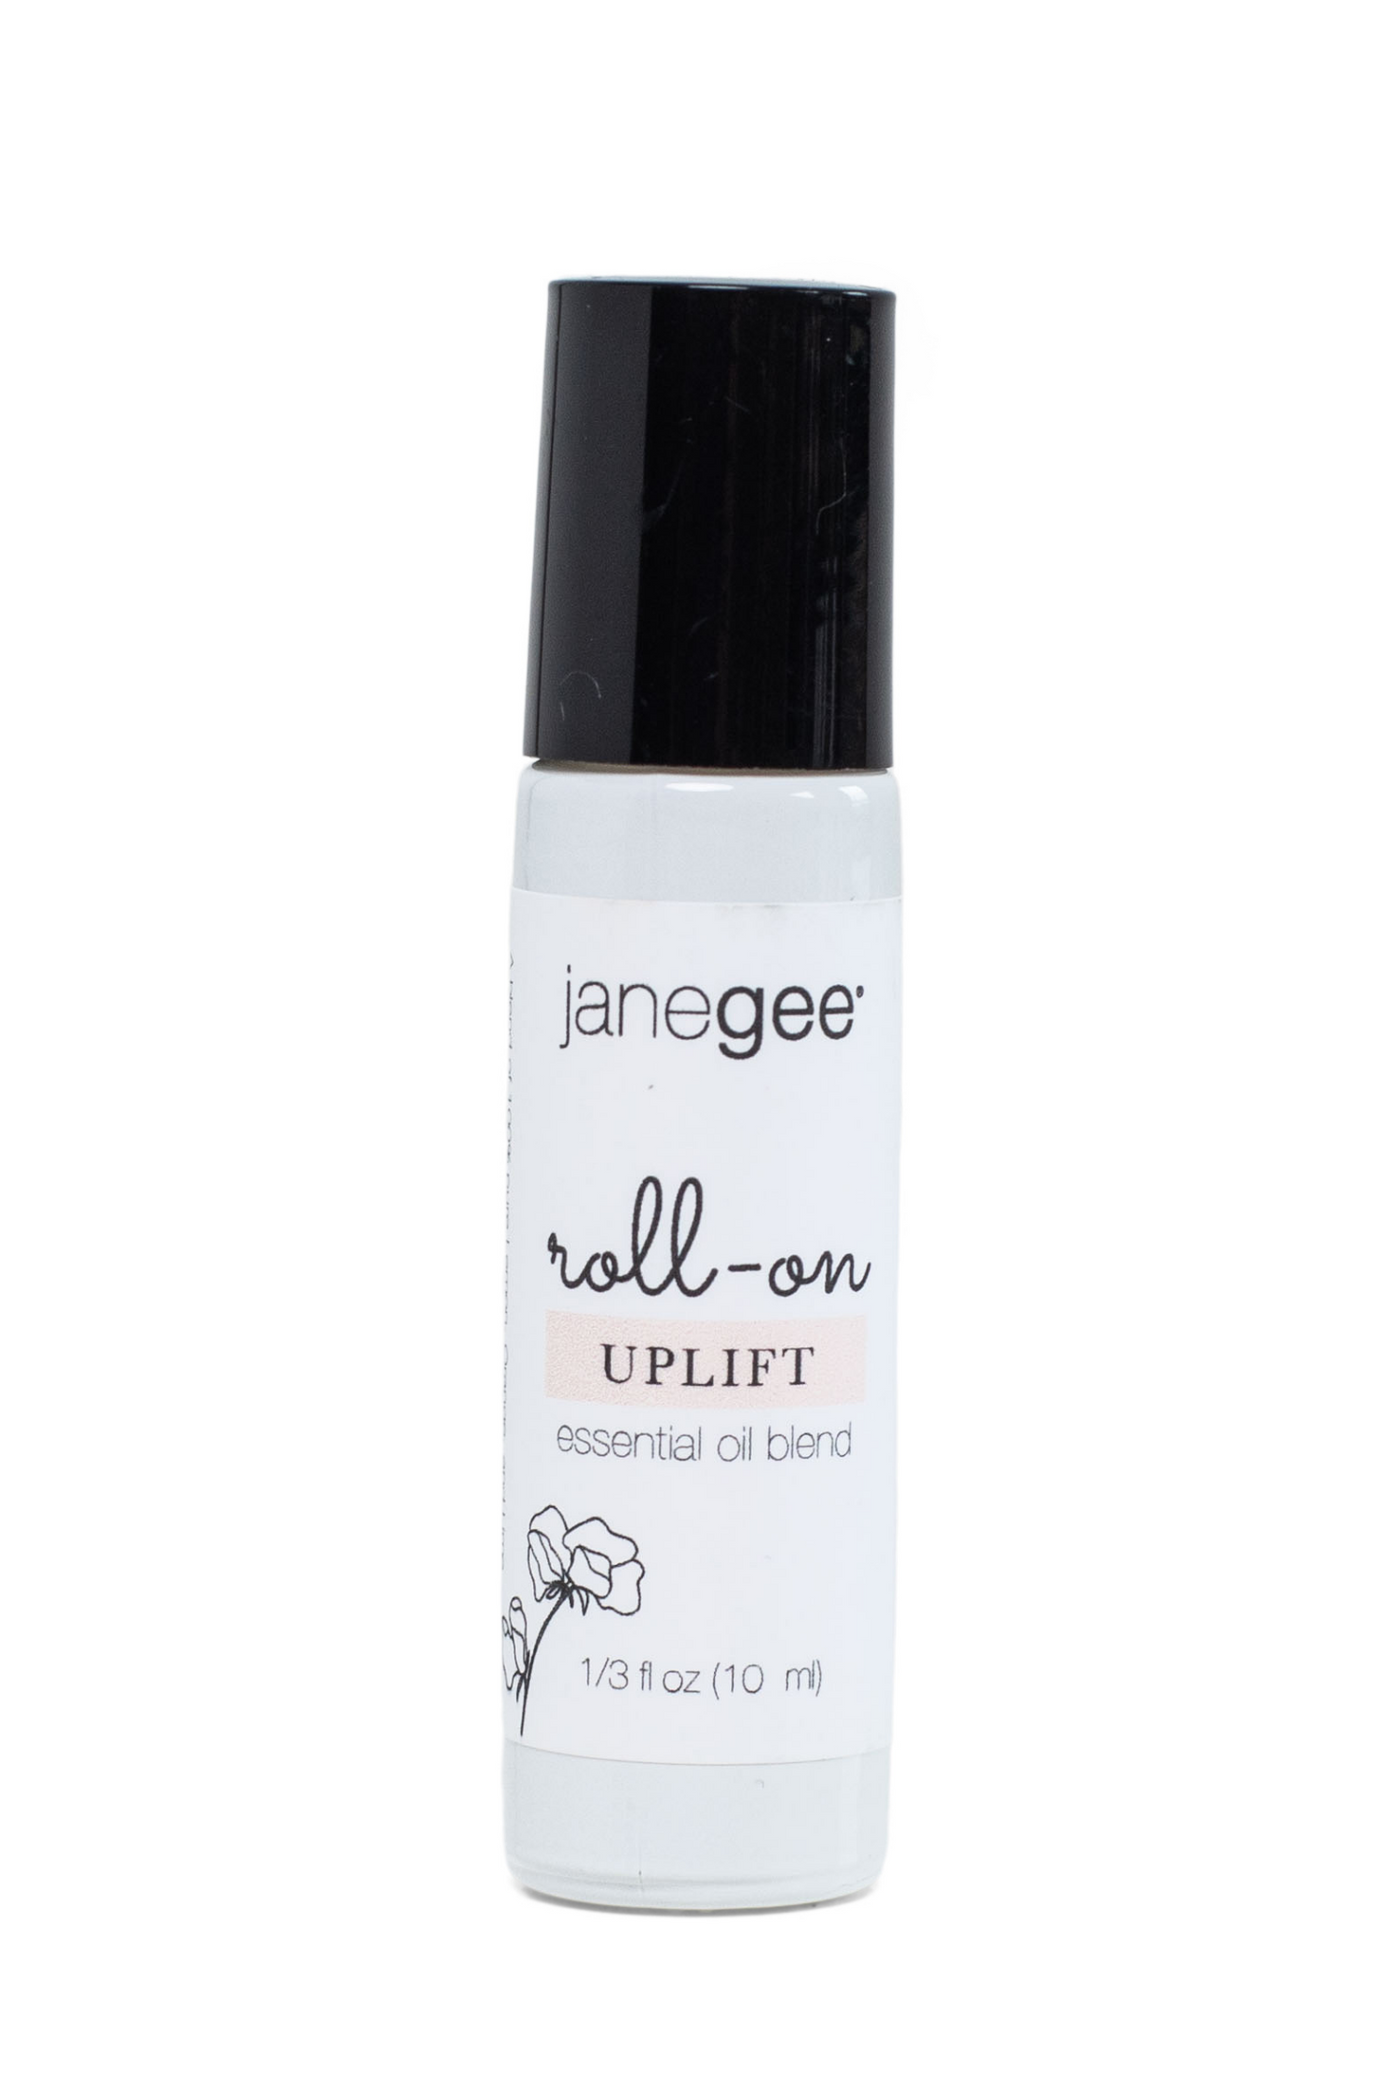 janegee Uplift Aromatherapy Roll-On